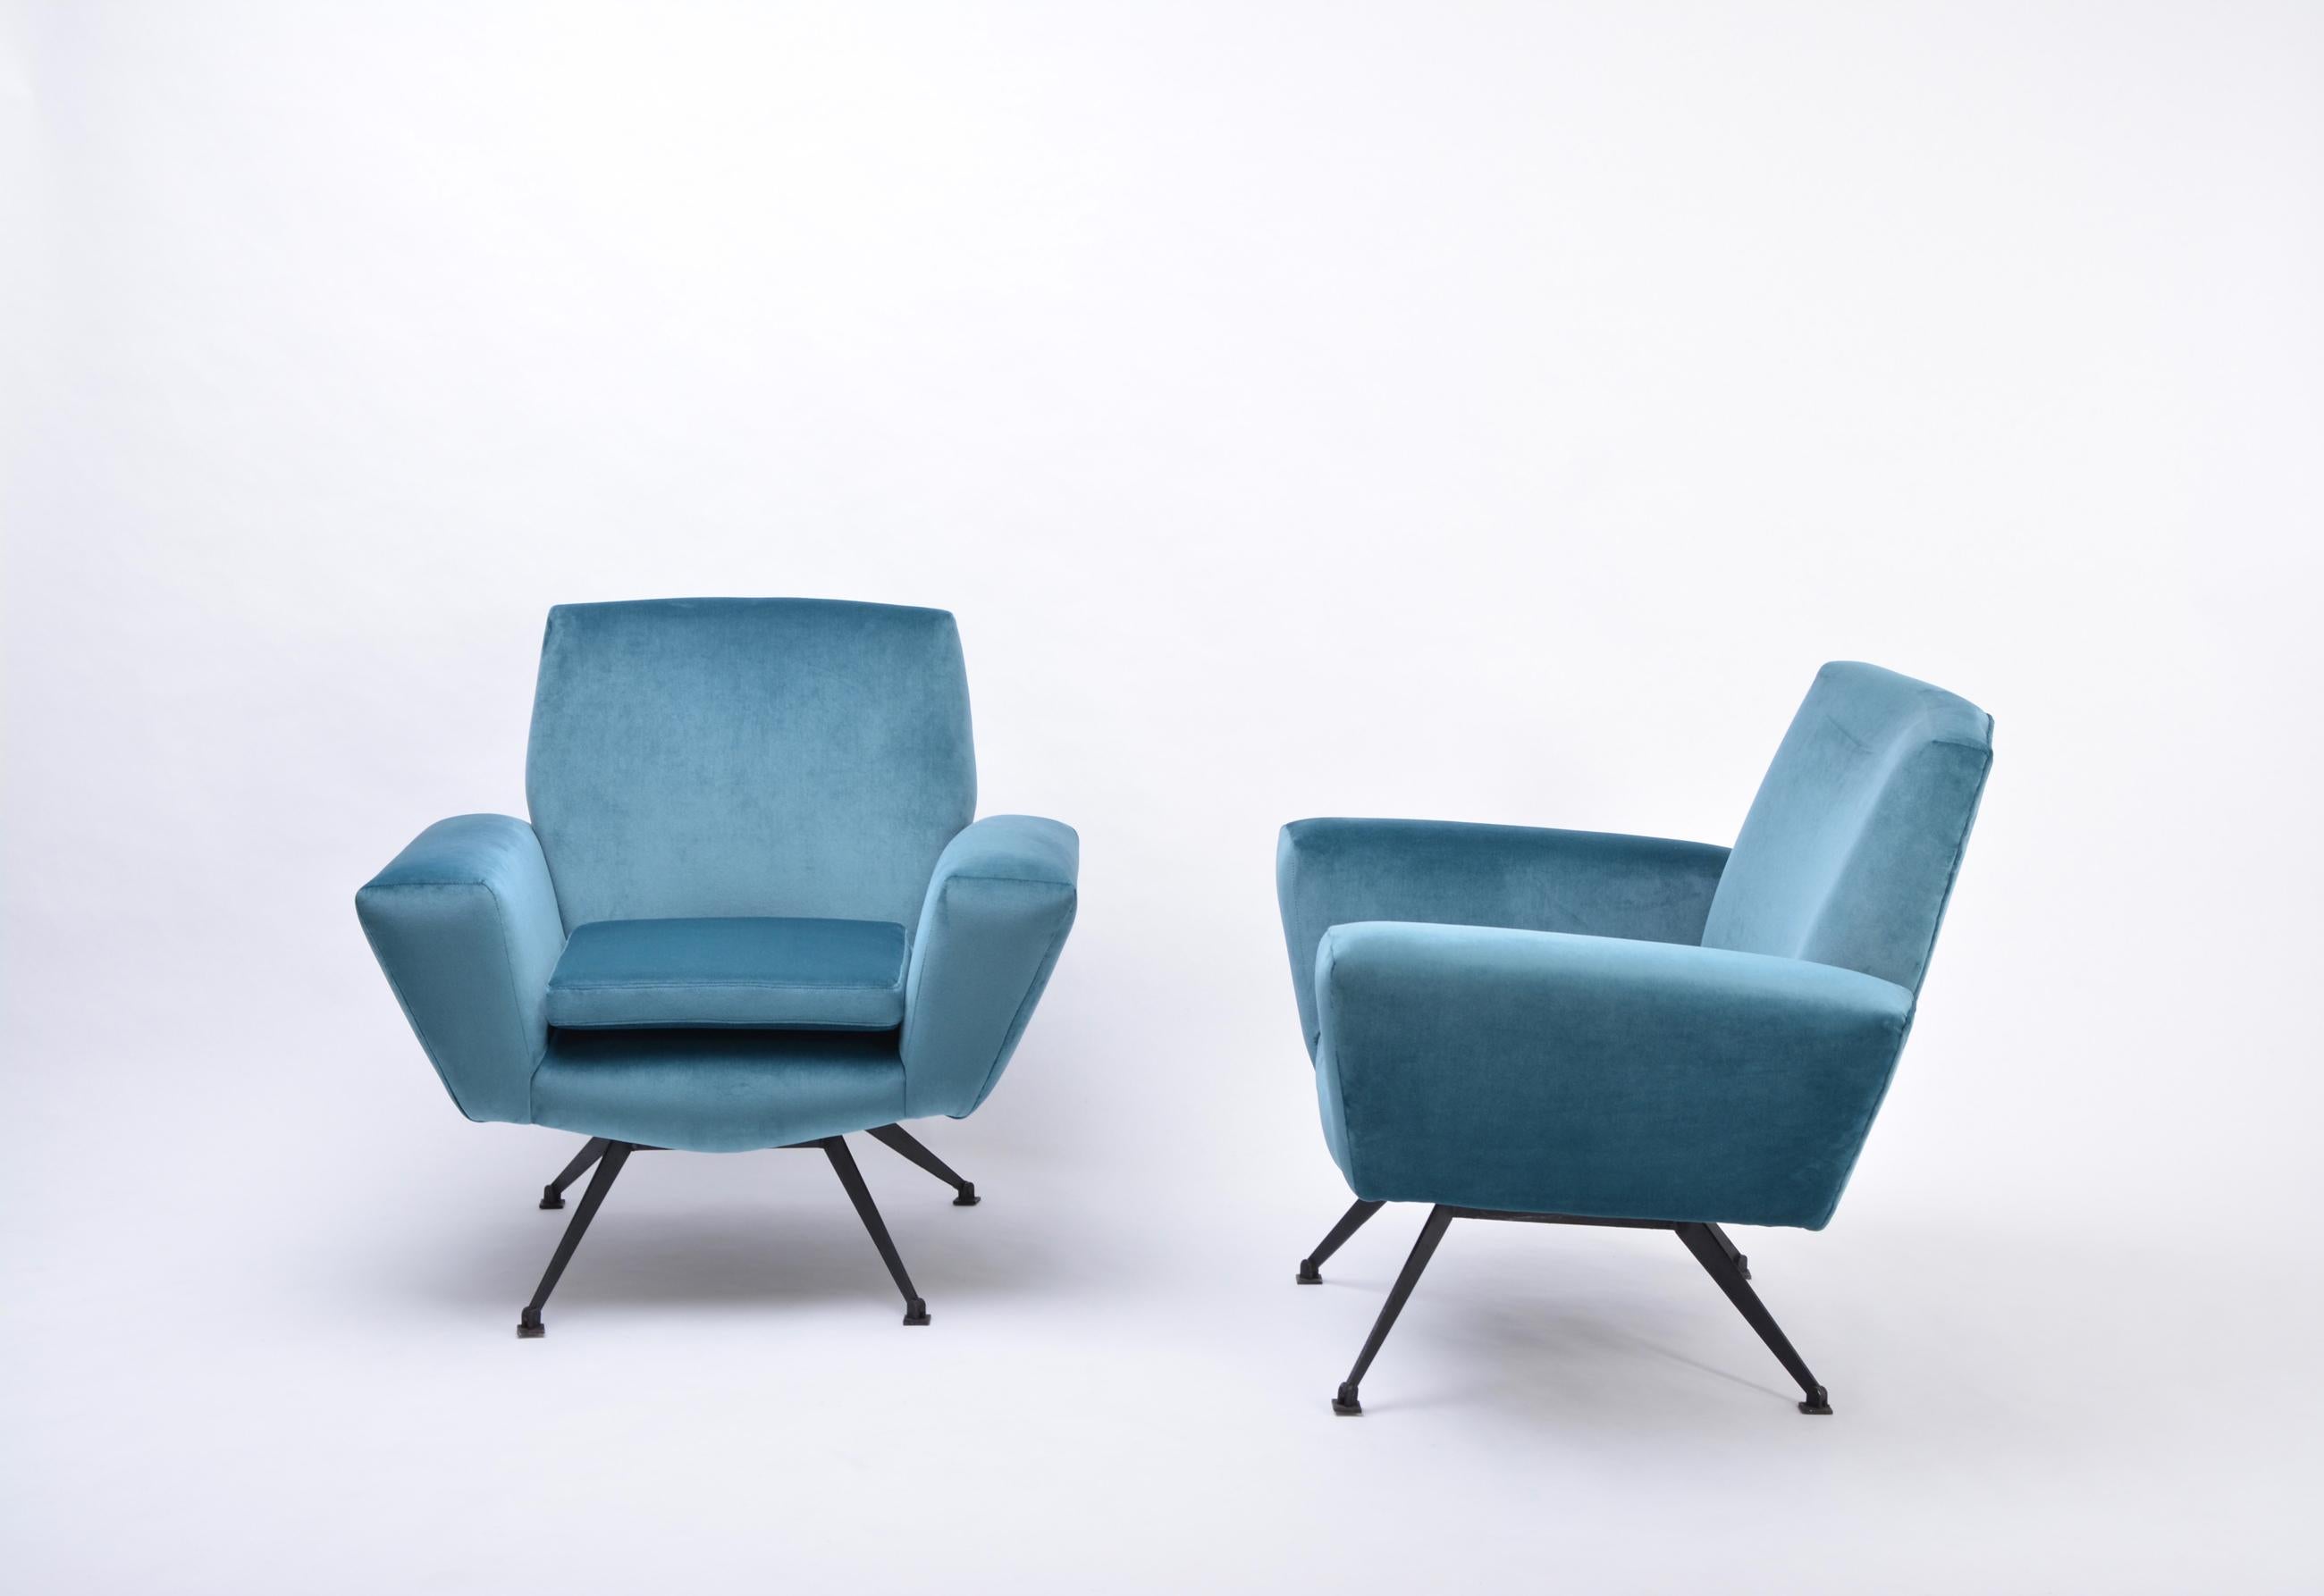 Metal Set of Two Blue Reupholstered Italian Mid-Century Modern Lounge Chairs by Lenzi